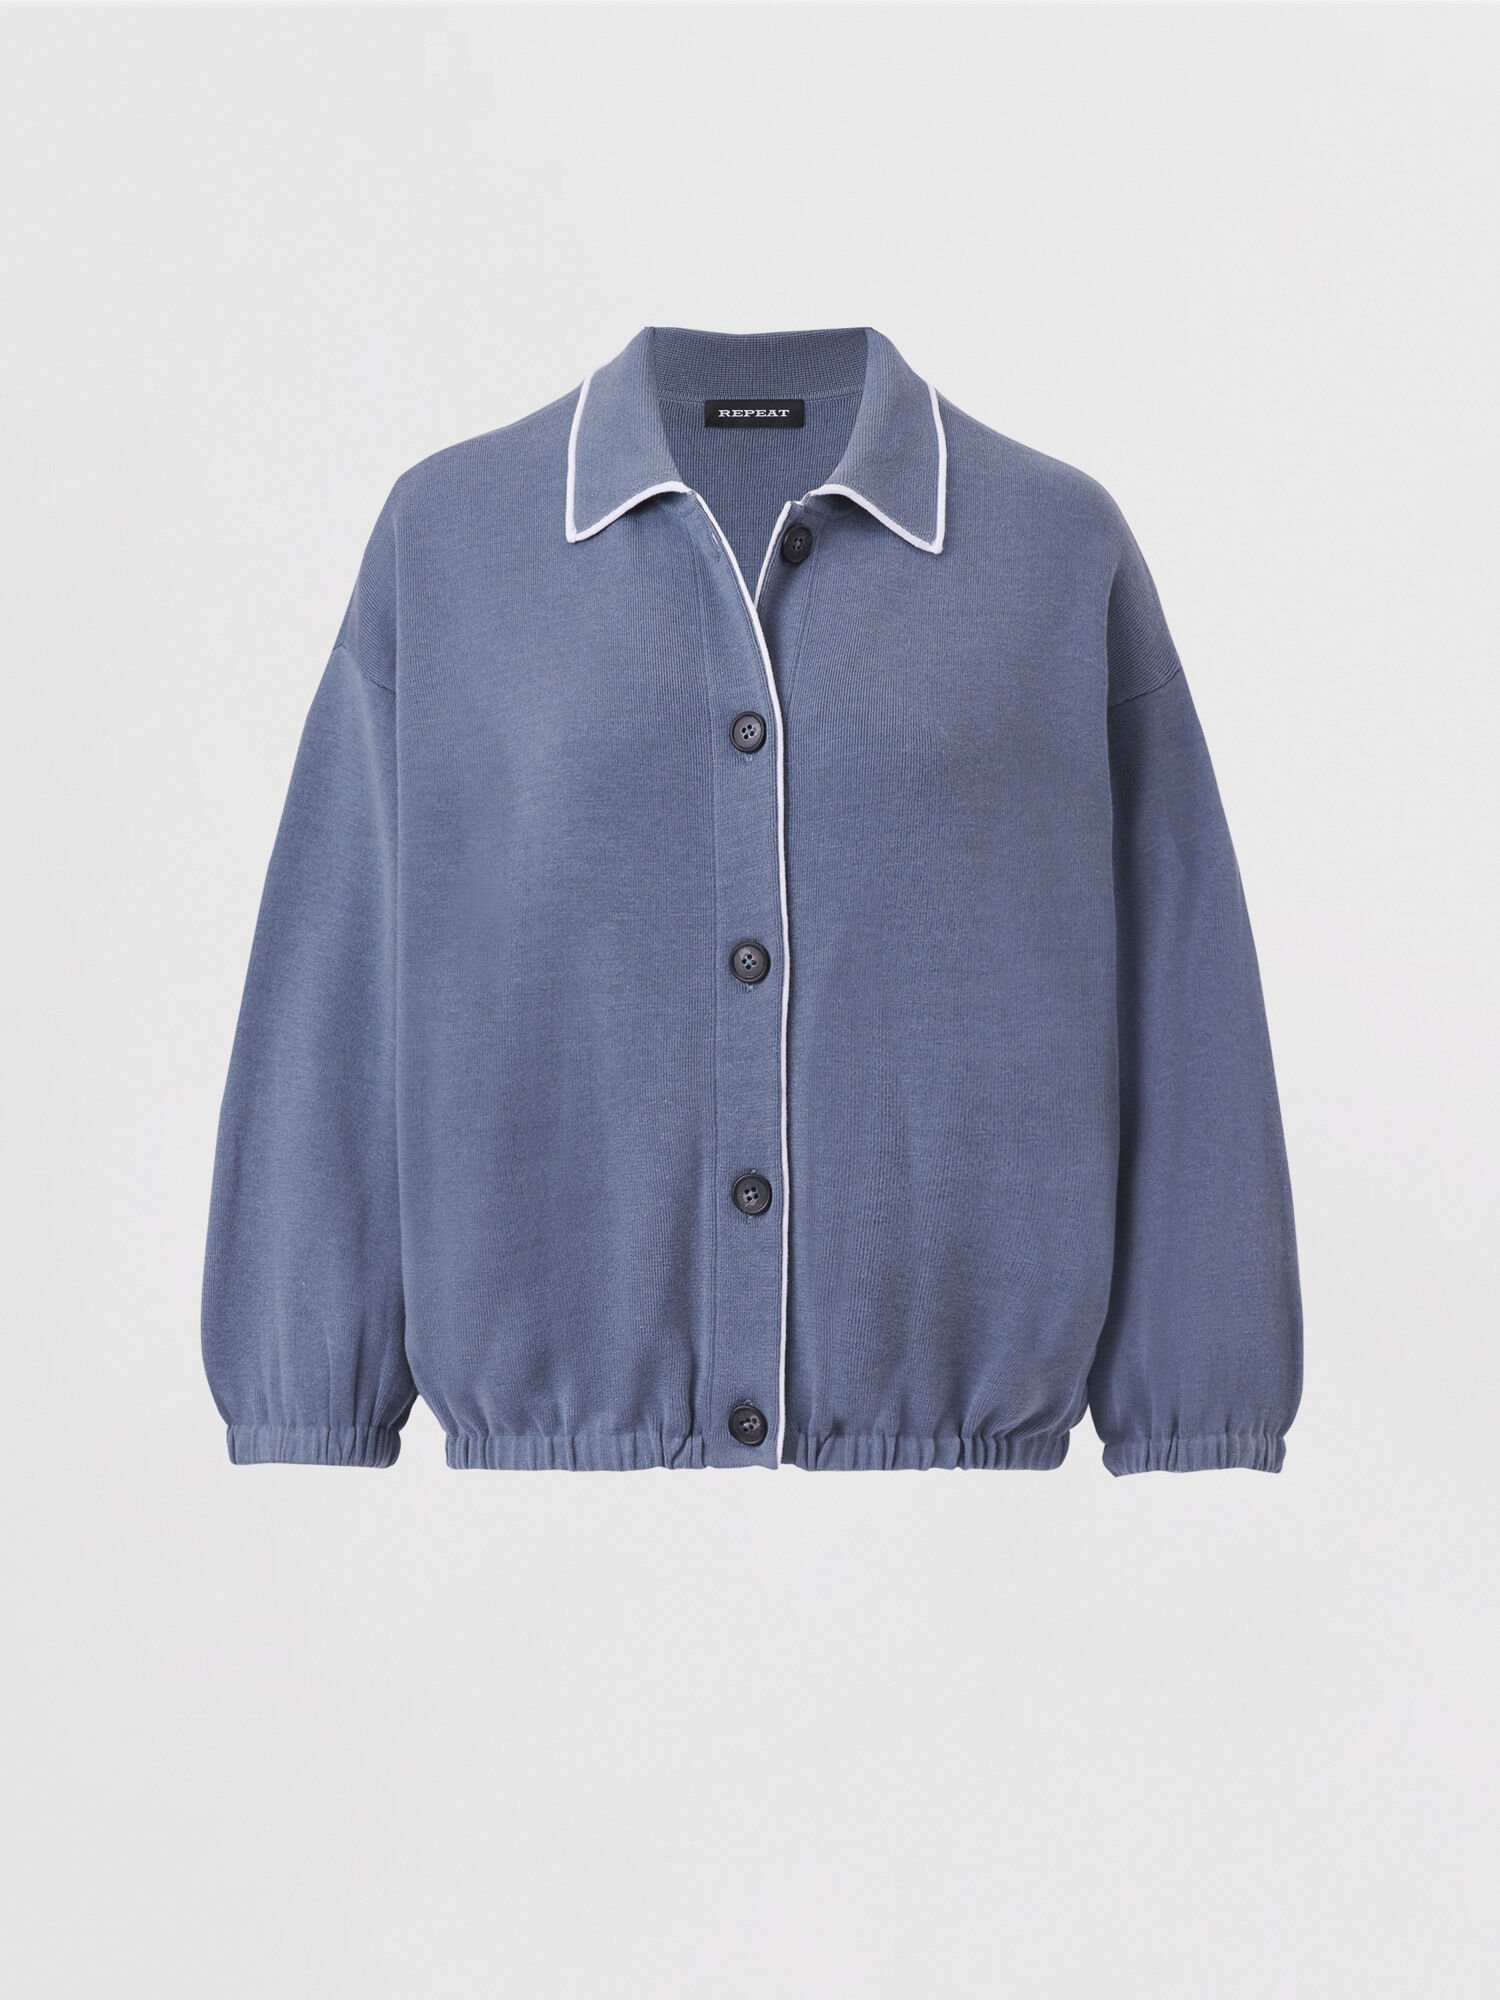 Double knit cardigan with shirt collar and contrasting seam